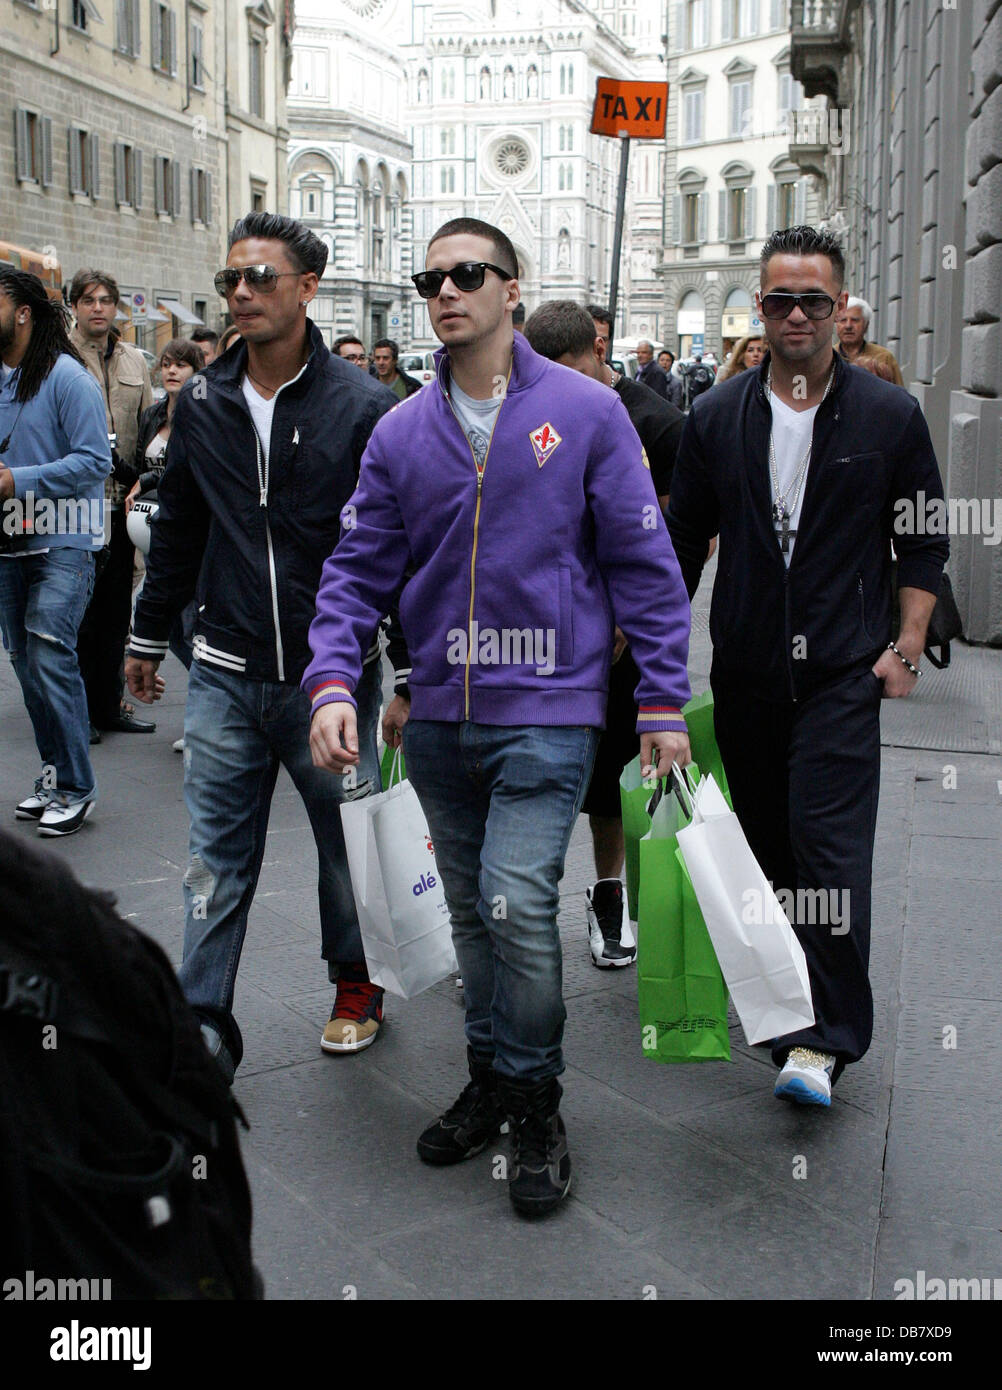 DJ Pauly D, Vinny Guadagnino and Mike 'The Situation' Sorrentino  shopping in Florence while filming the reality show 'Jersey Shore' Florence, Italy - 15.05.11 Stock Photo